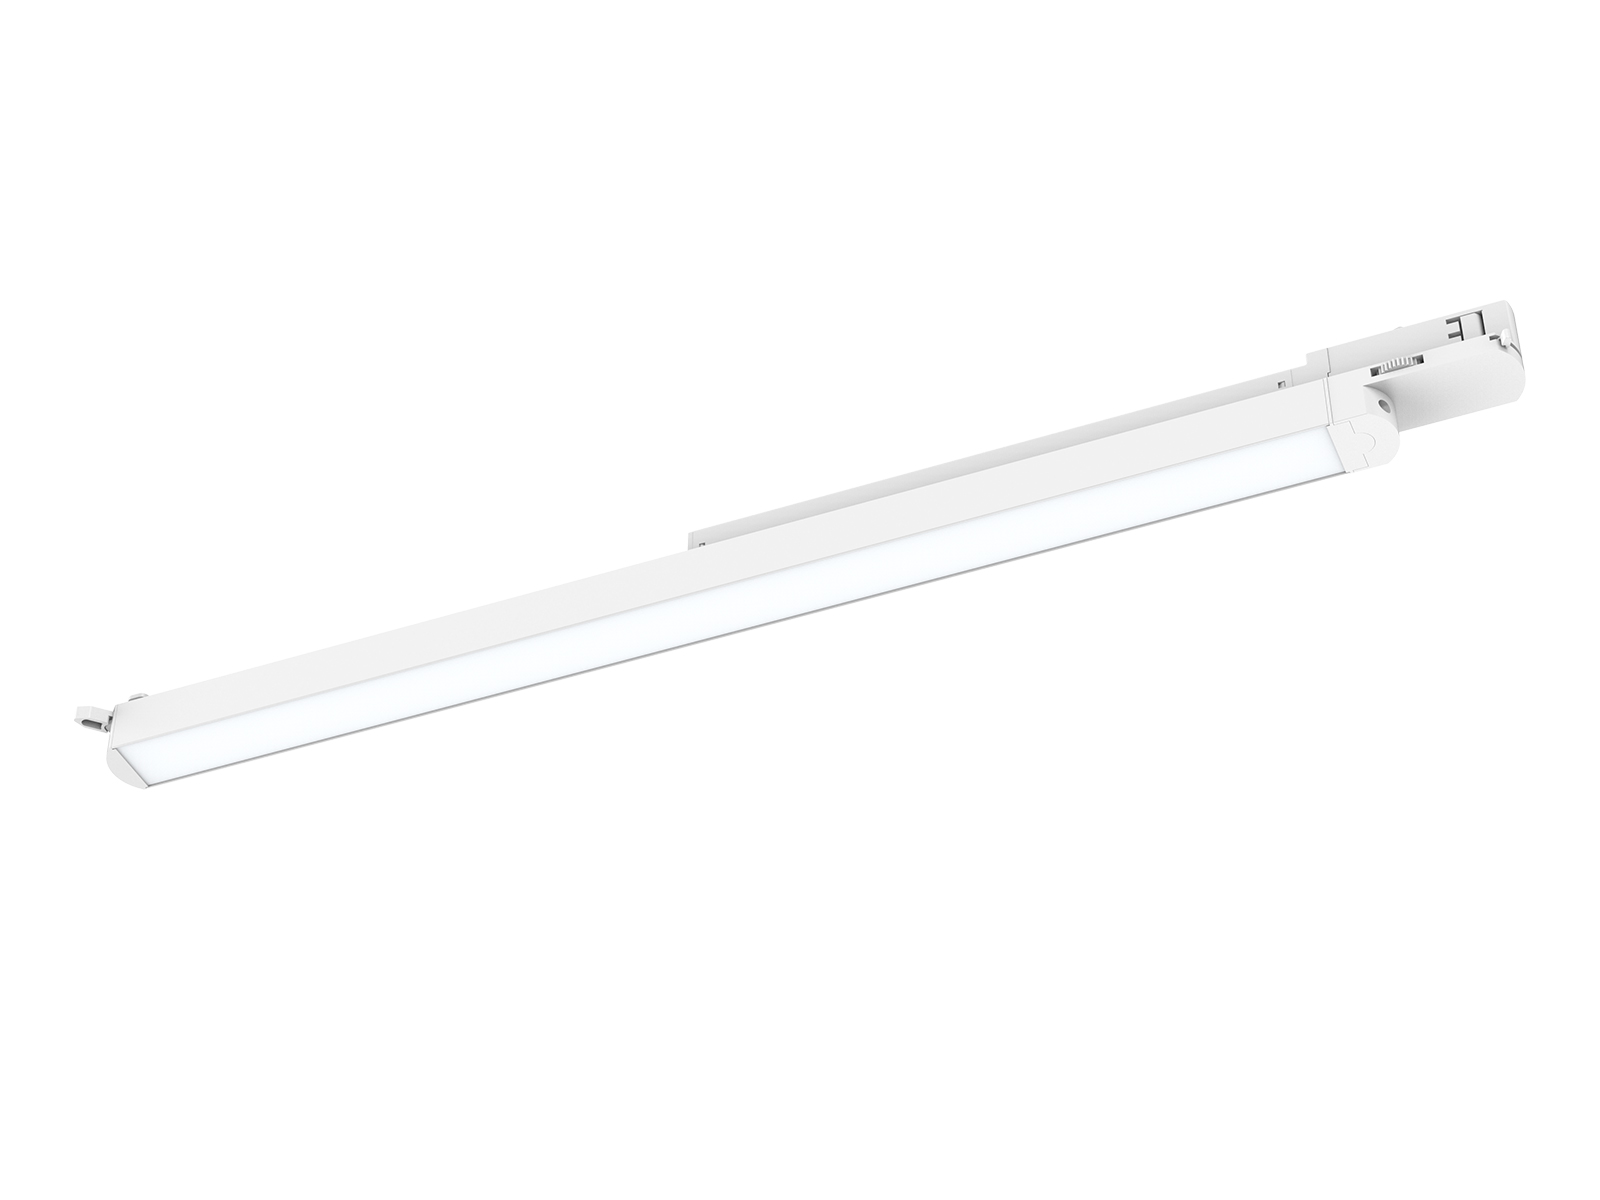 TL50 CCT changeable LED linear track light